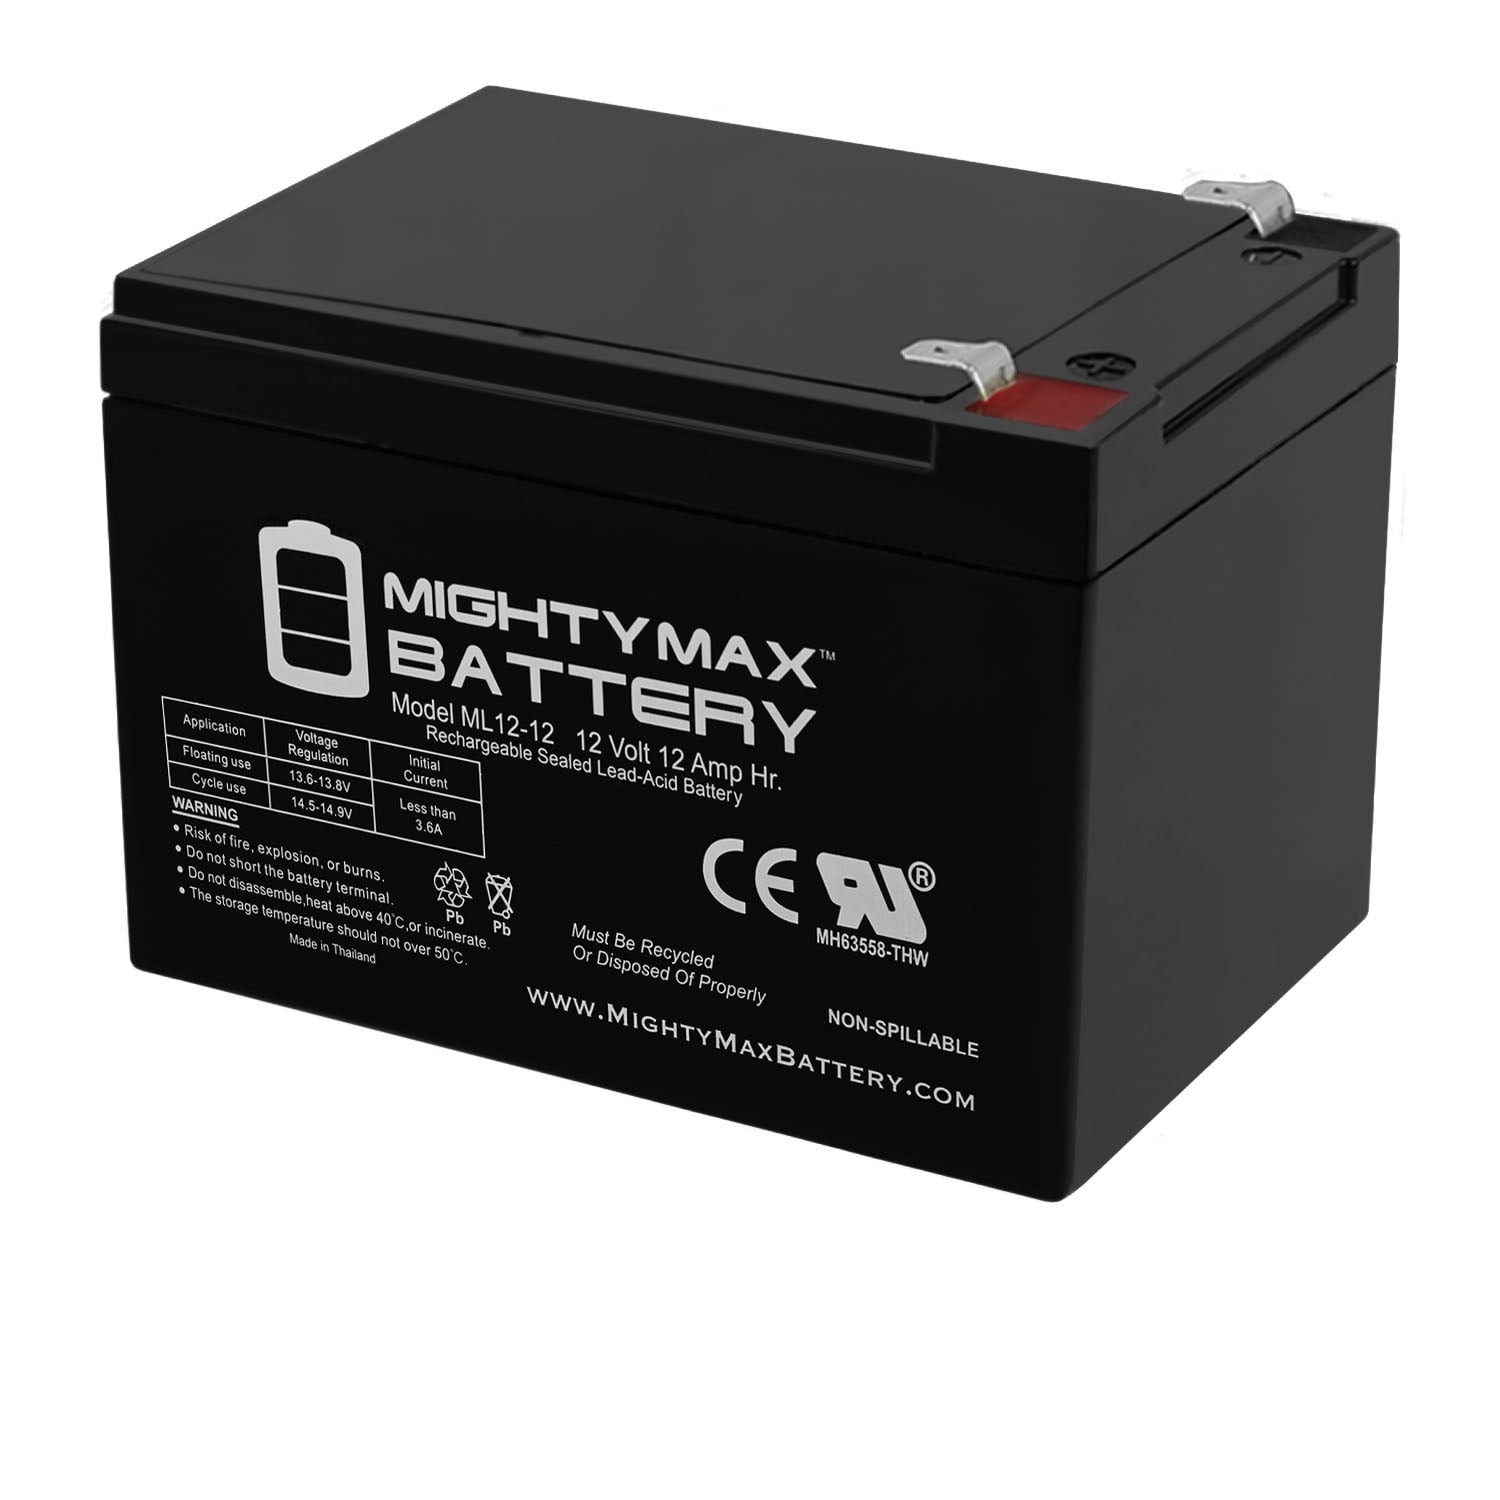 ExpertPower 12V 50Ah Lithium LiFePO4 Deep Cycle Rechargeable Battery |  2500-7000 Life Cycles & 10-Year Lifetime | Built-in BMS | Perfect for RV